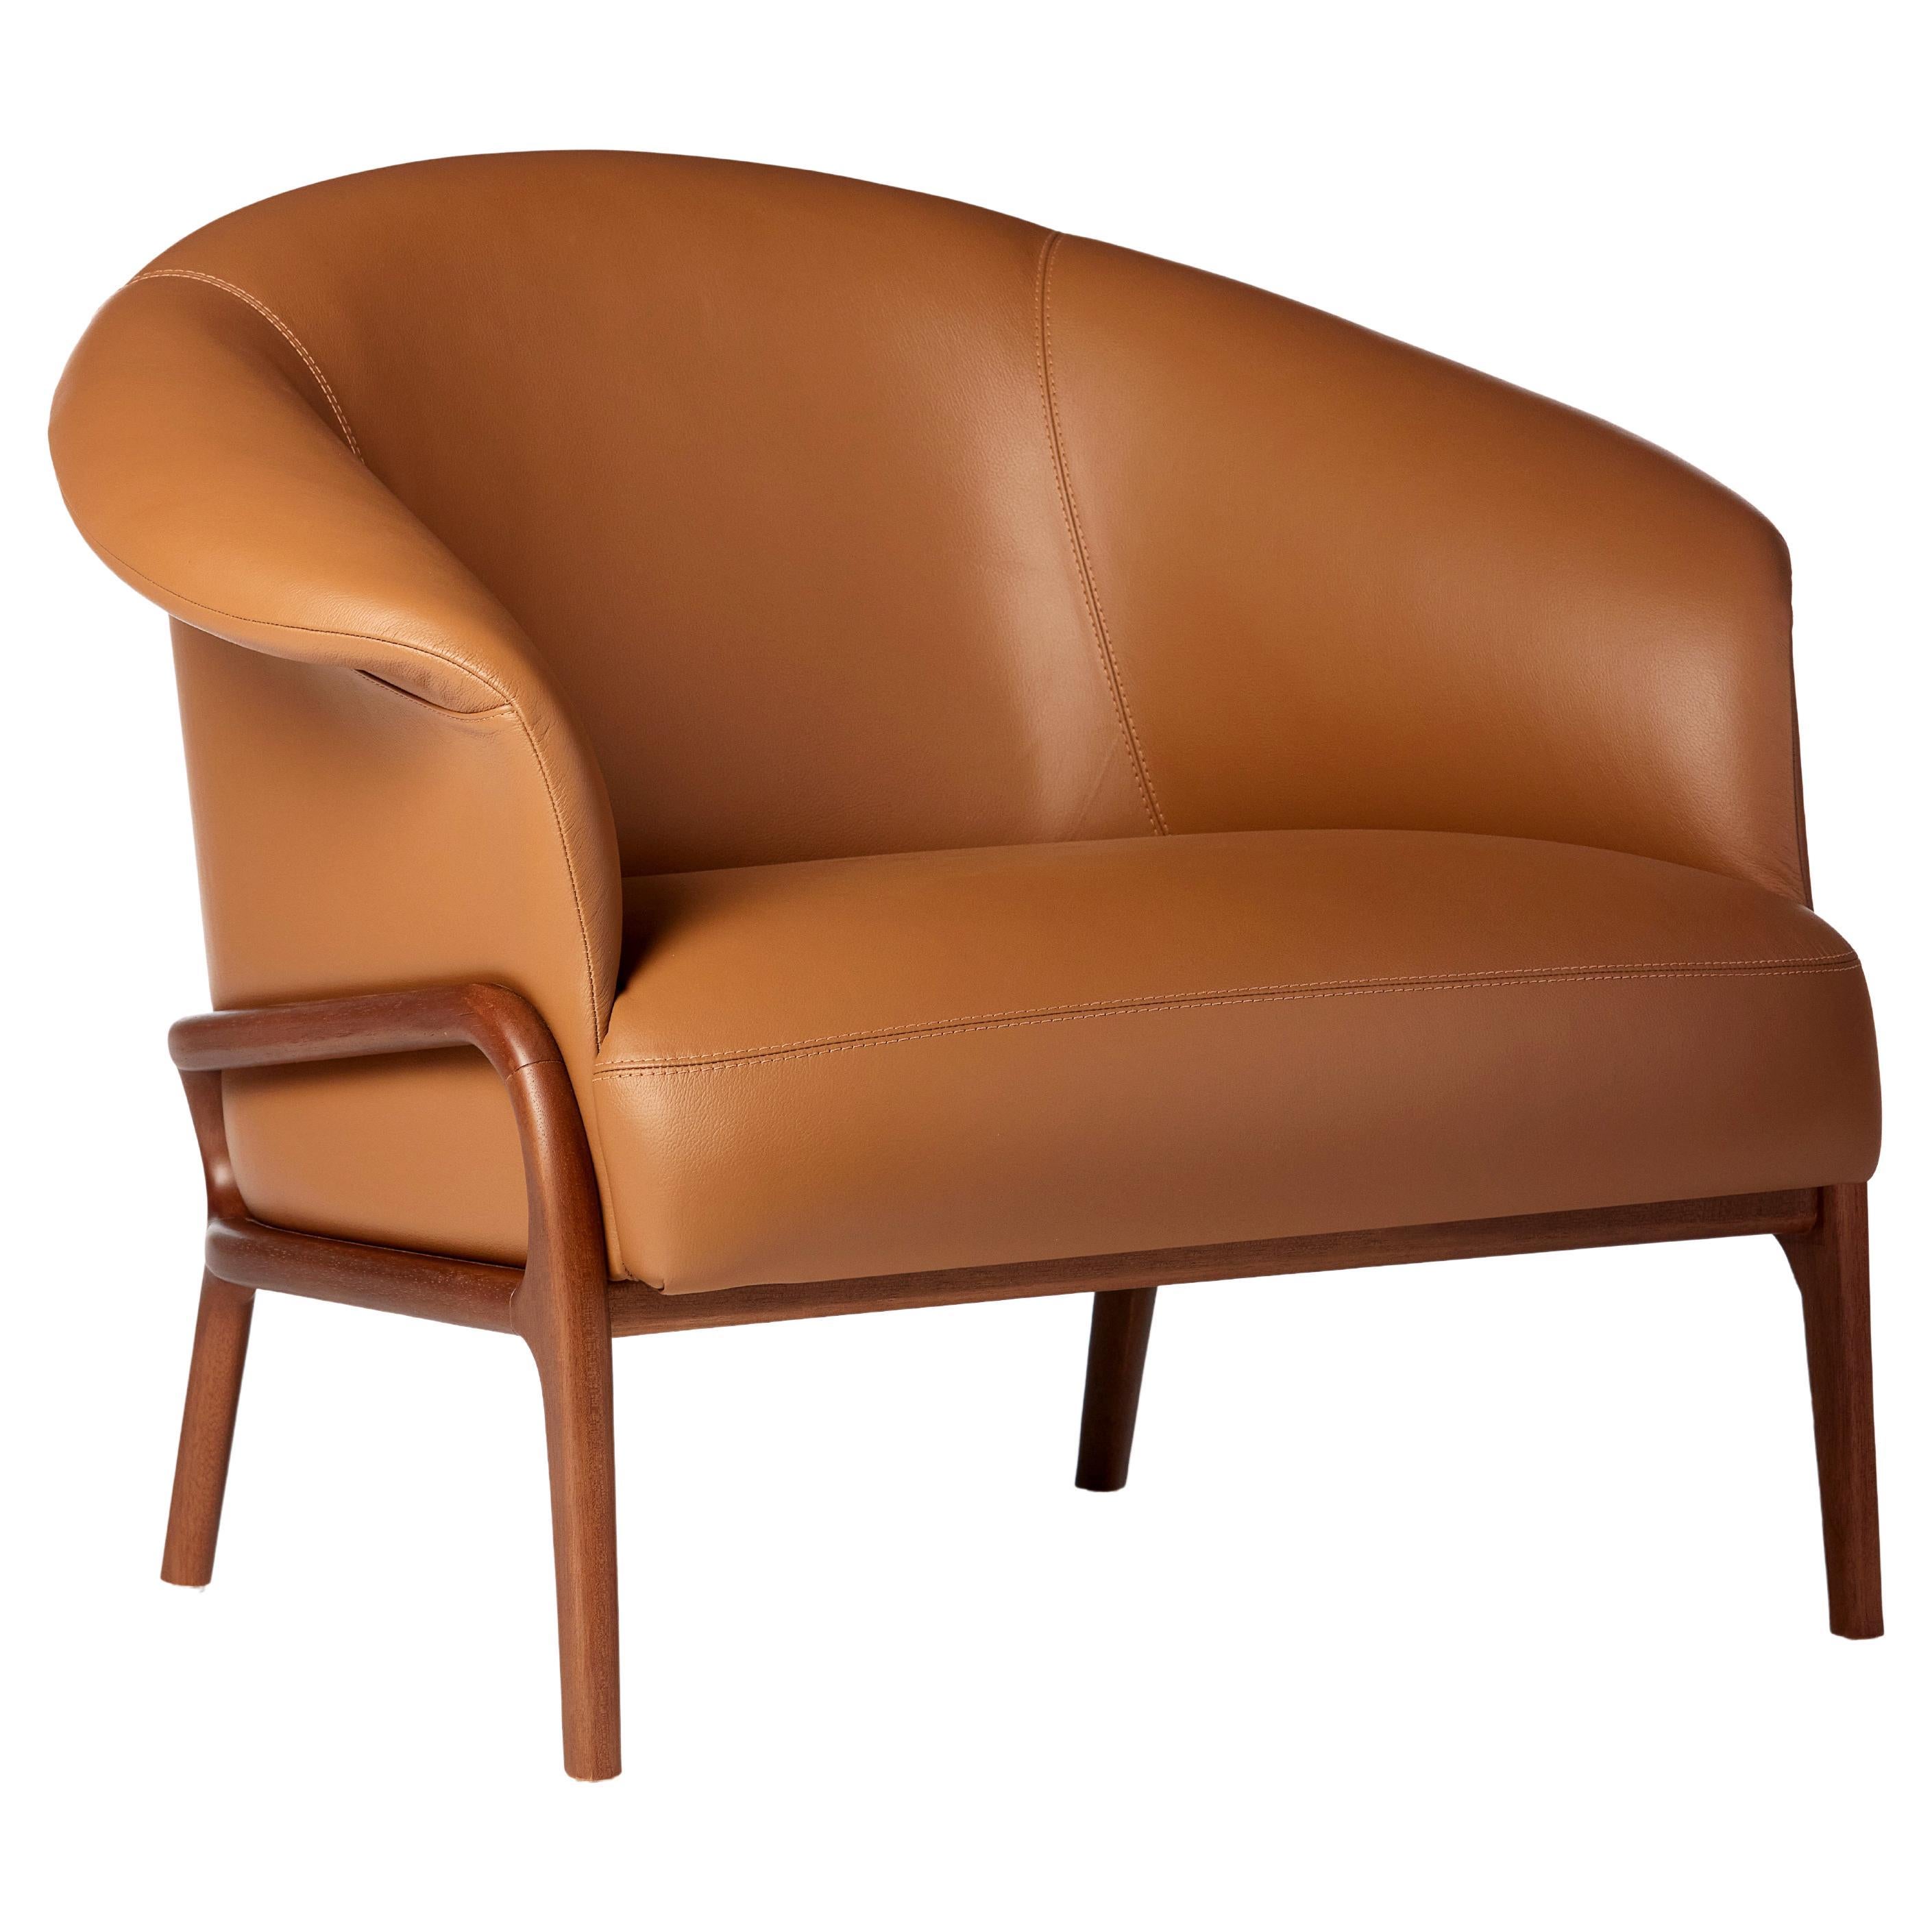 Modern Organic Style Collana Armchair in Solid Wood, Leather Flexible Seating